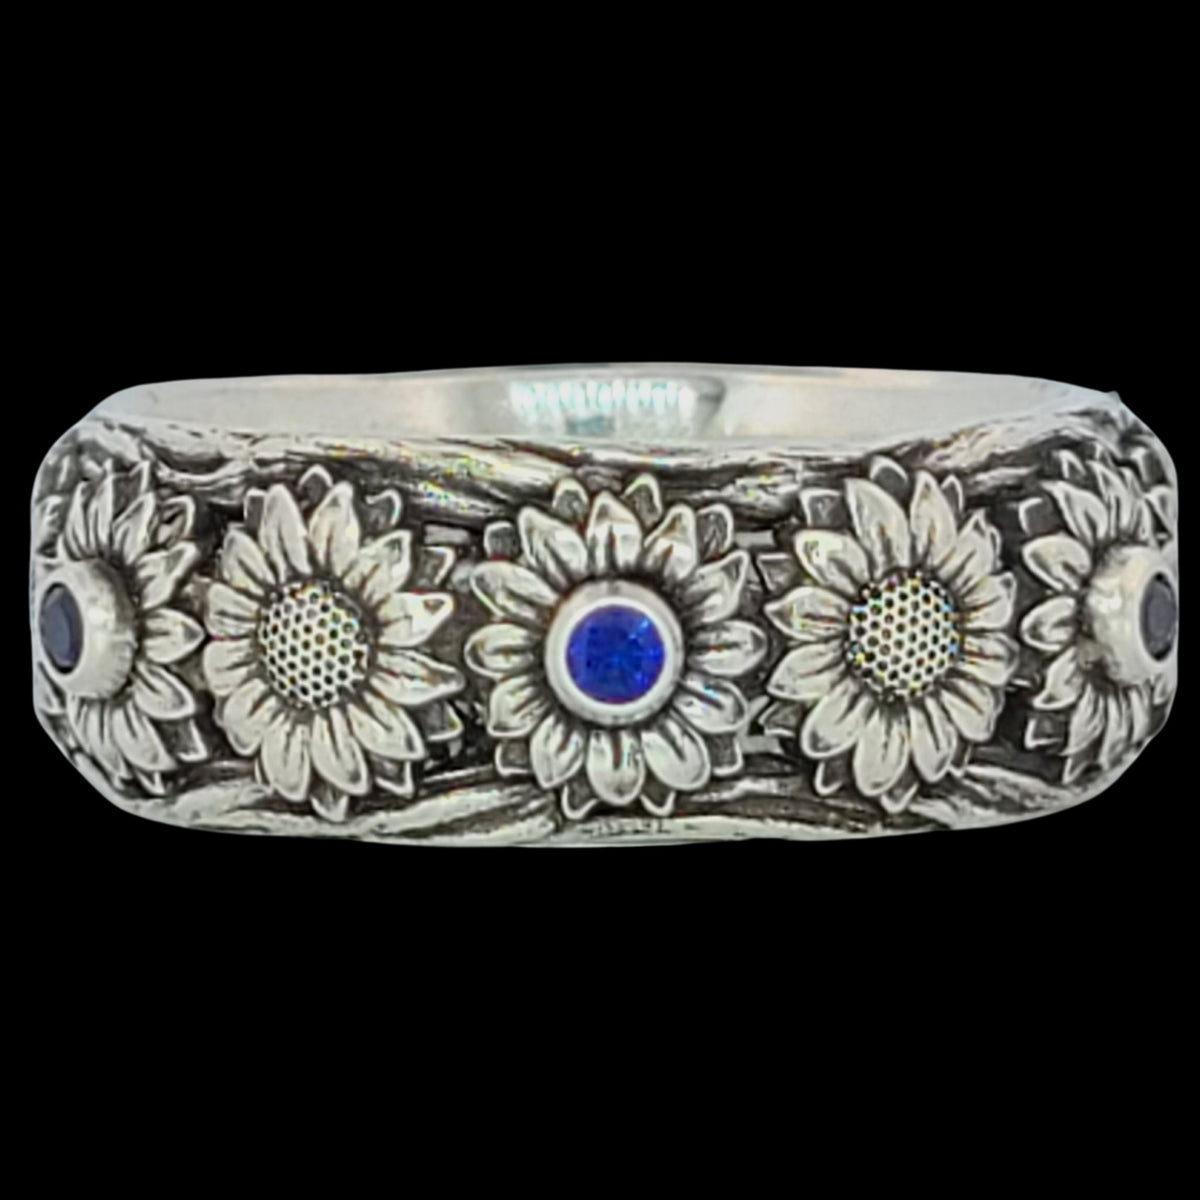 SUNFLOWER BAND RING in SILVER with CHOICE of Six 2mm GEMSTONES - Starting at $259